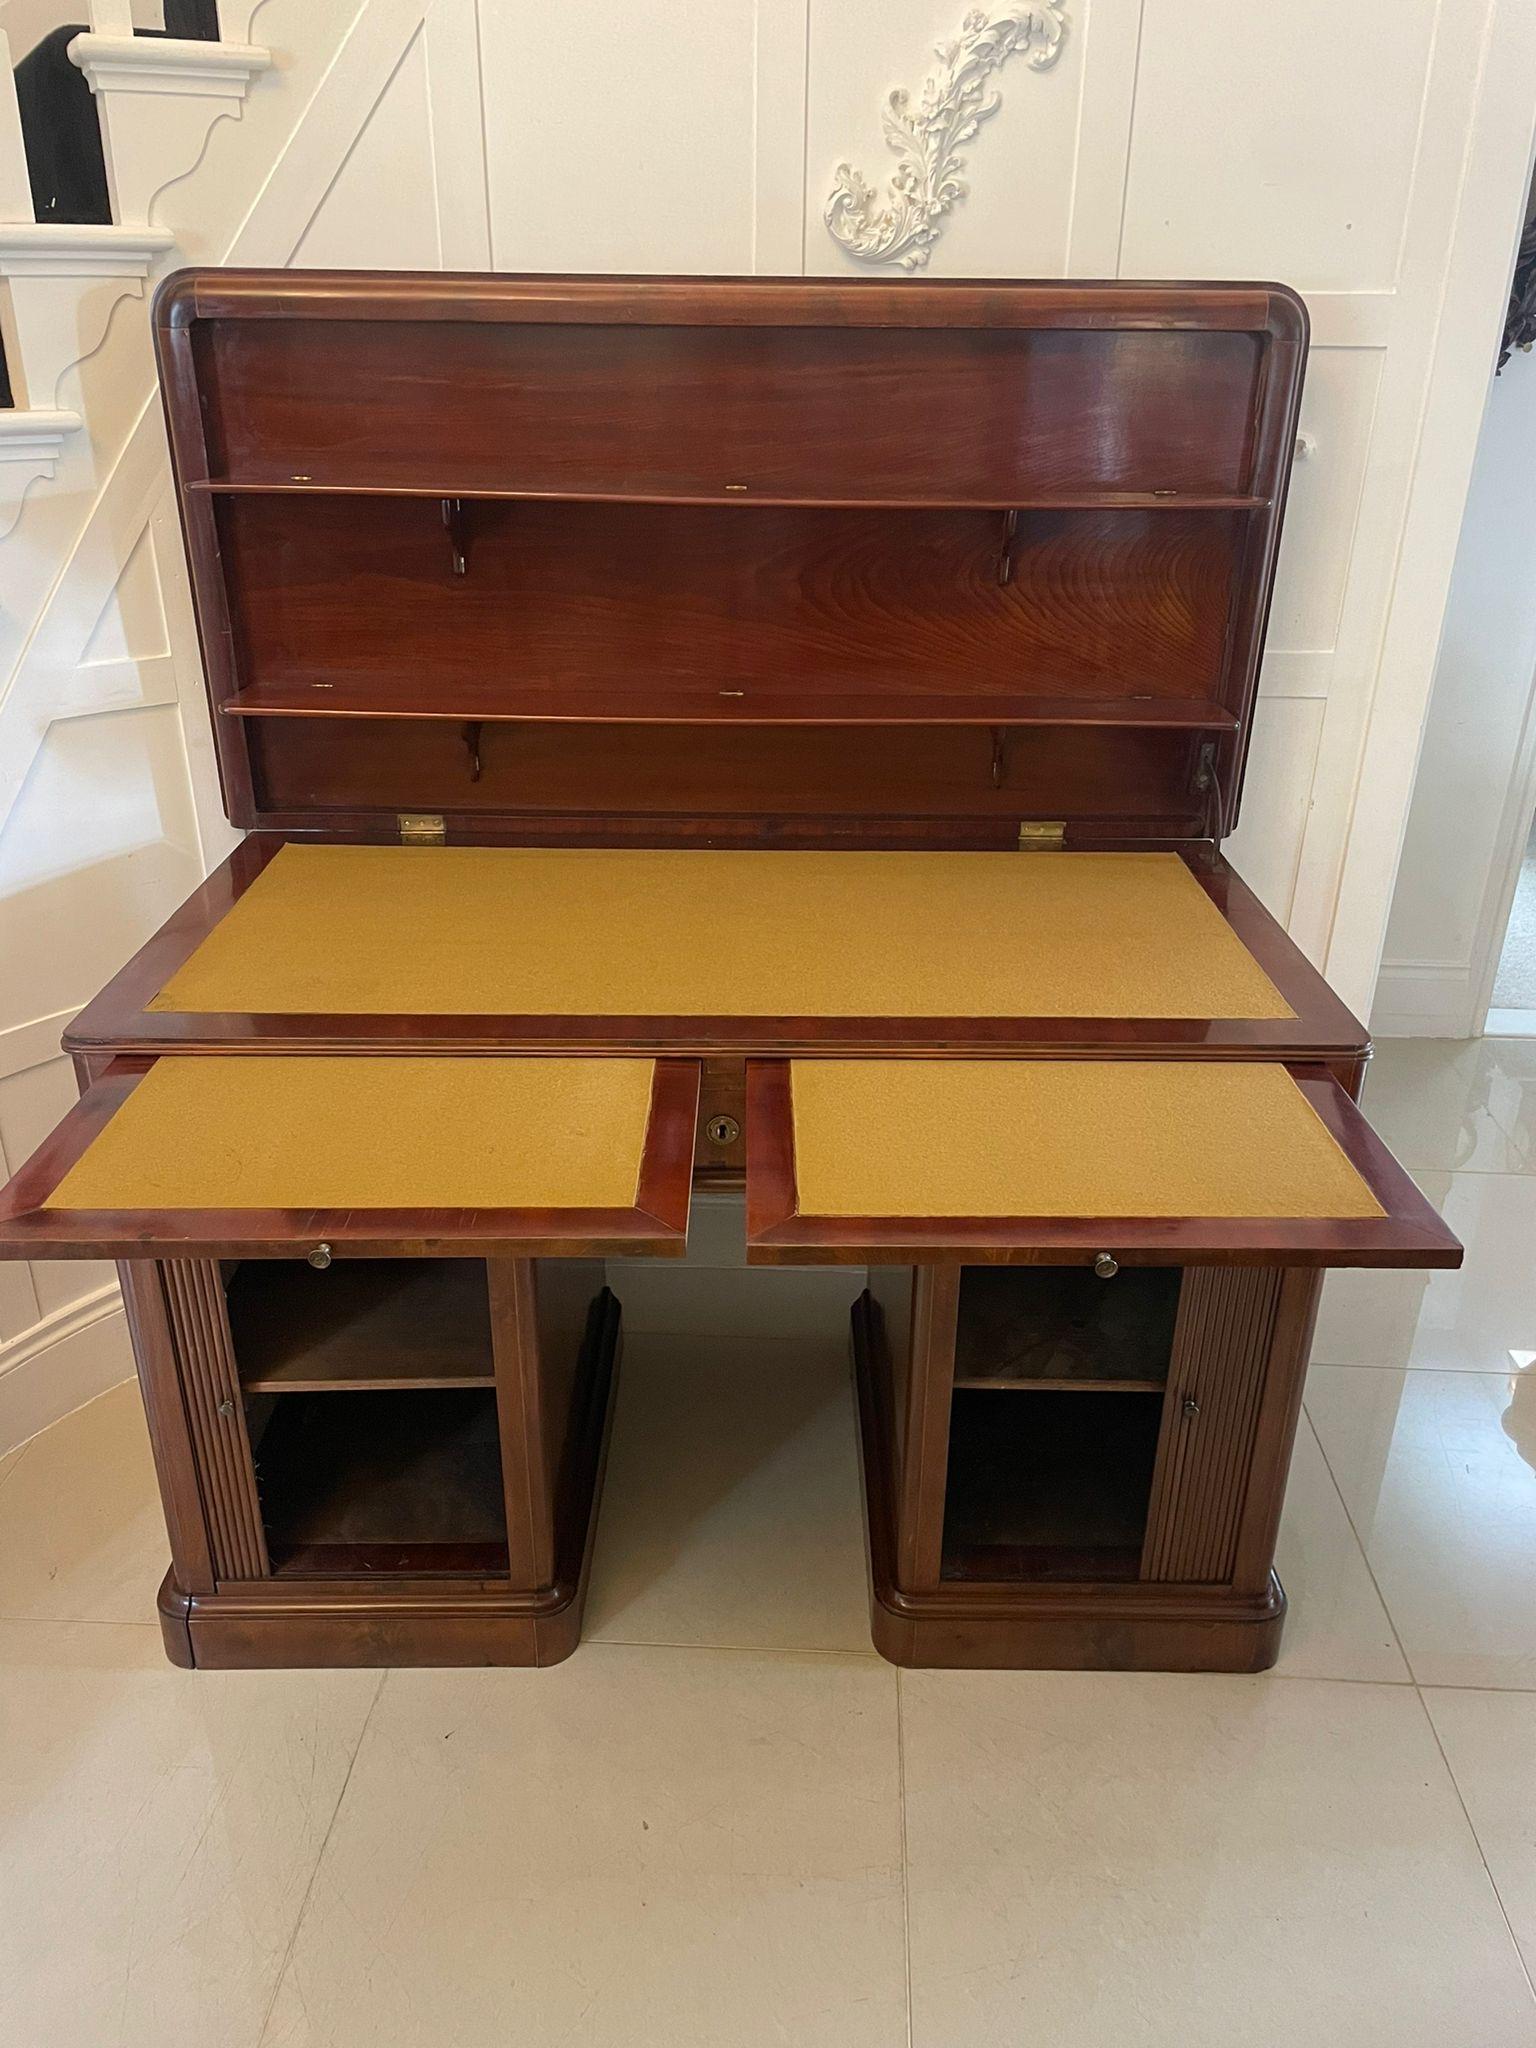 Unusual Antique Victorian quality figured mahogany kneehole architects desk having a quality figured mahogany lift up top opening to reveal a large writing surface crossbanded in mahogany, unusual double fold down display shelves above two pull out